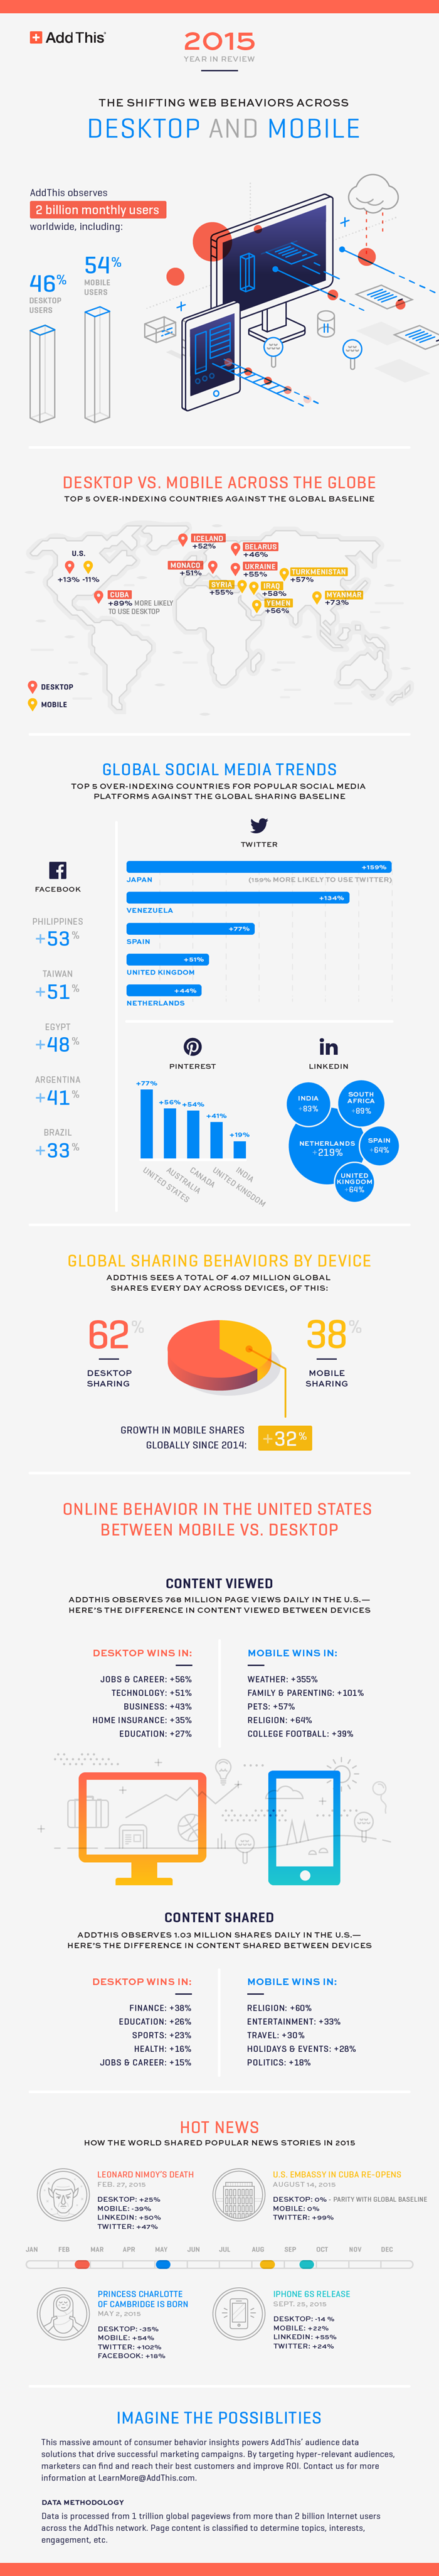 AddThis-2015-EOY-Infographic-700